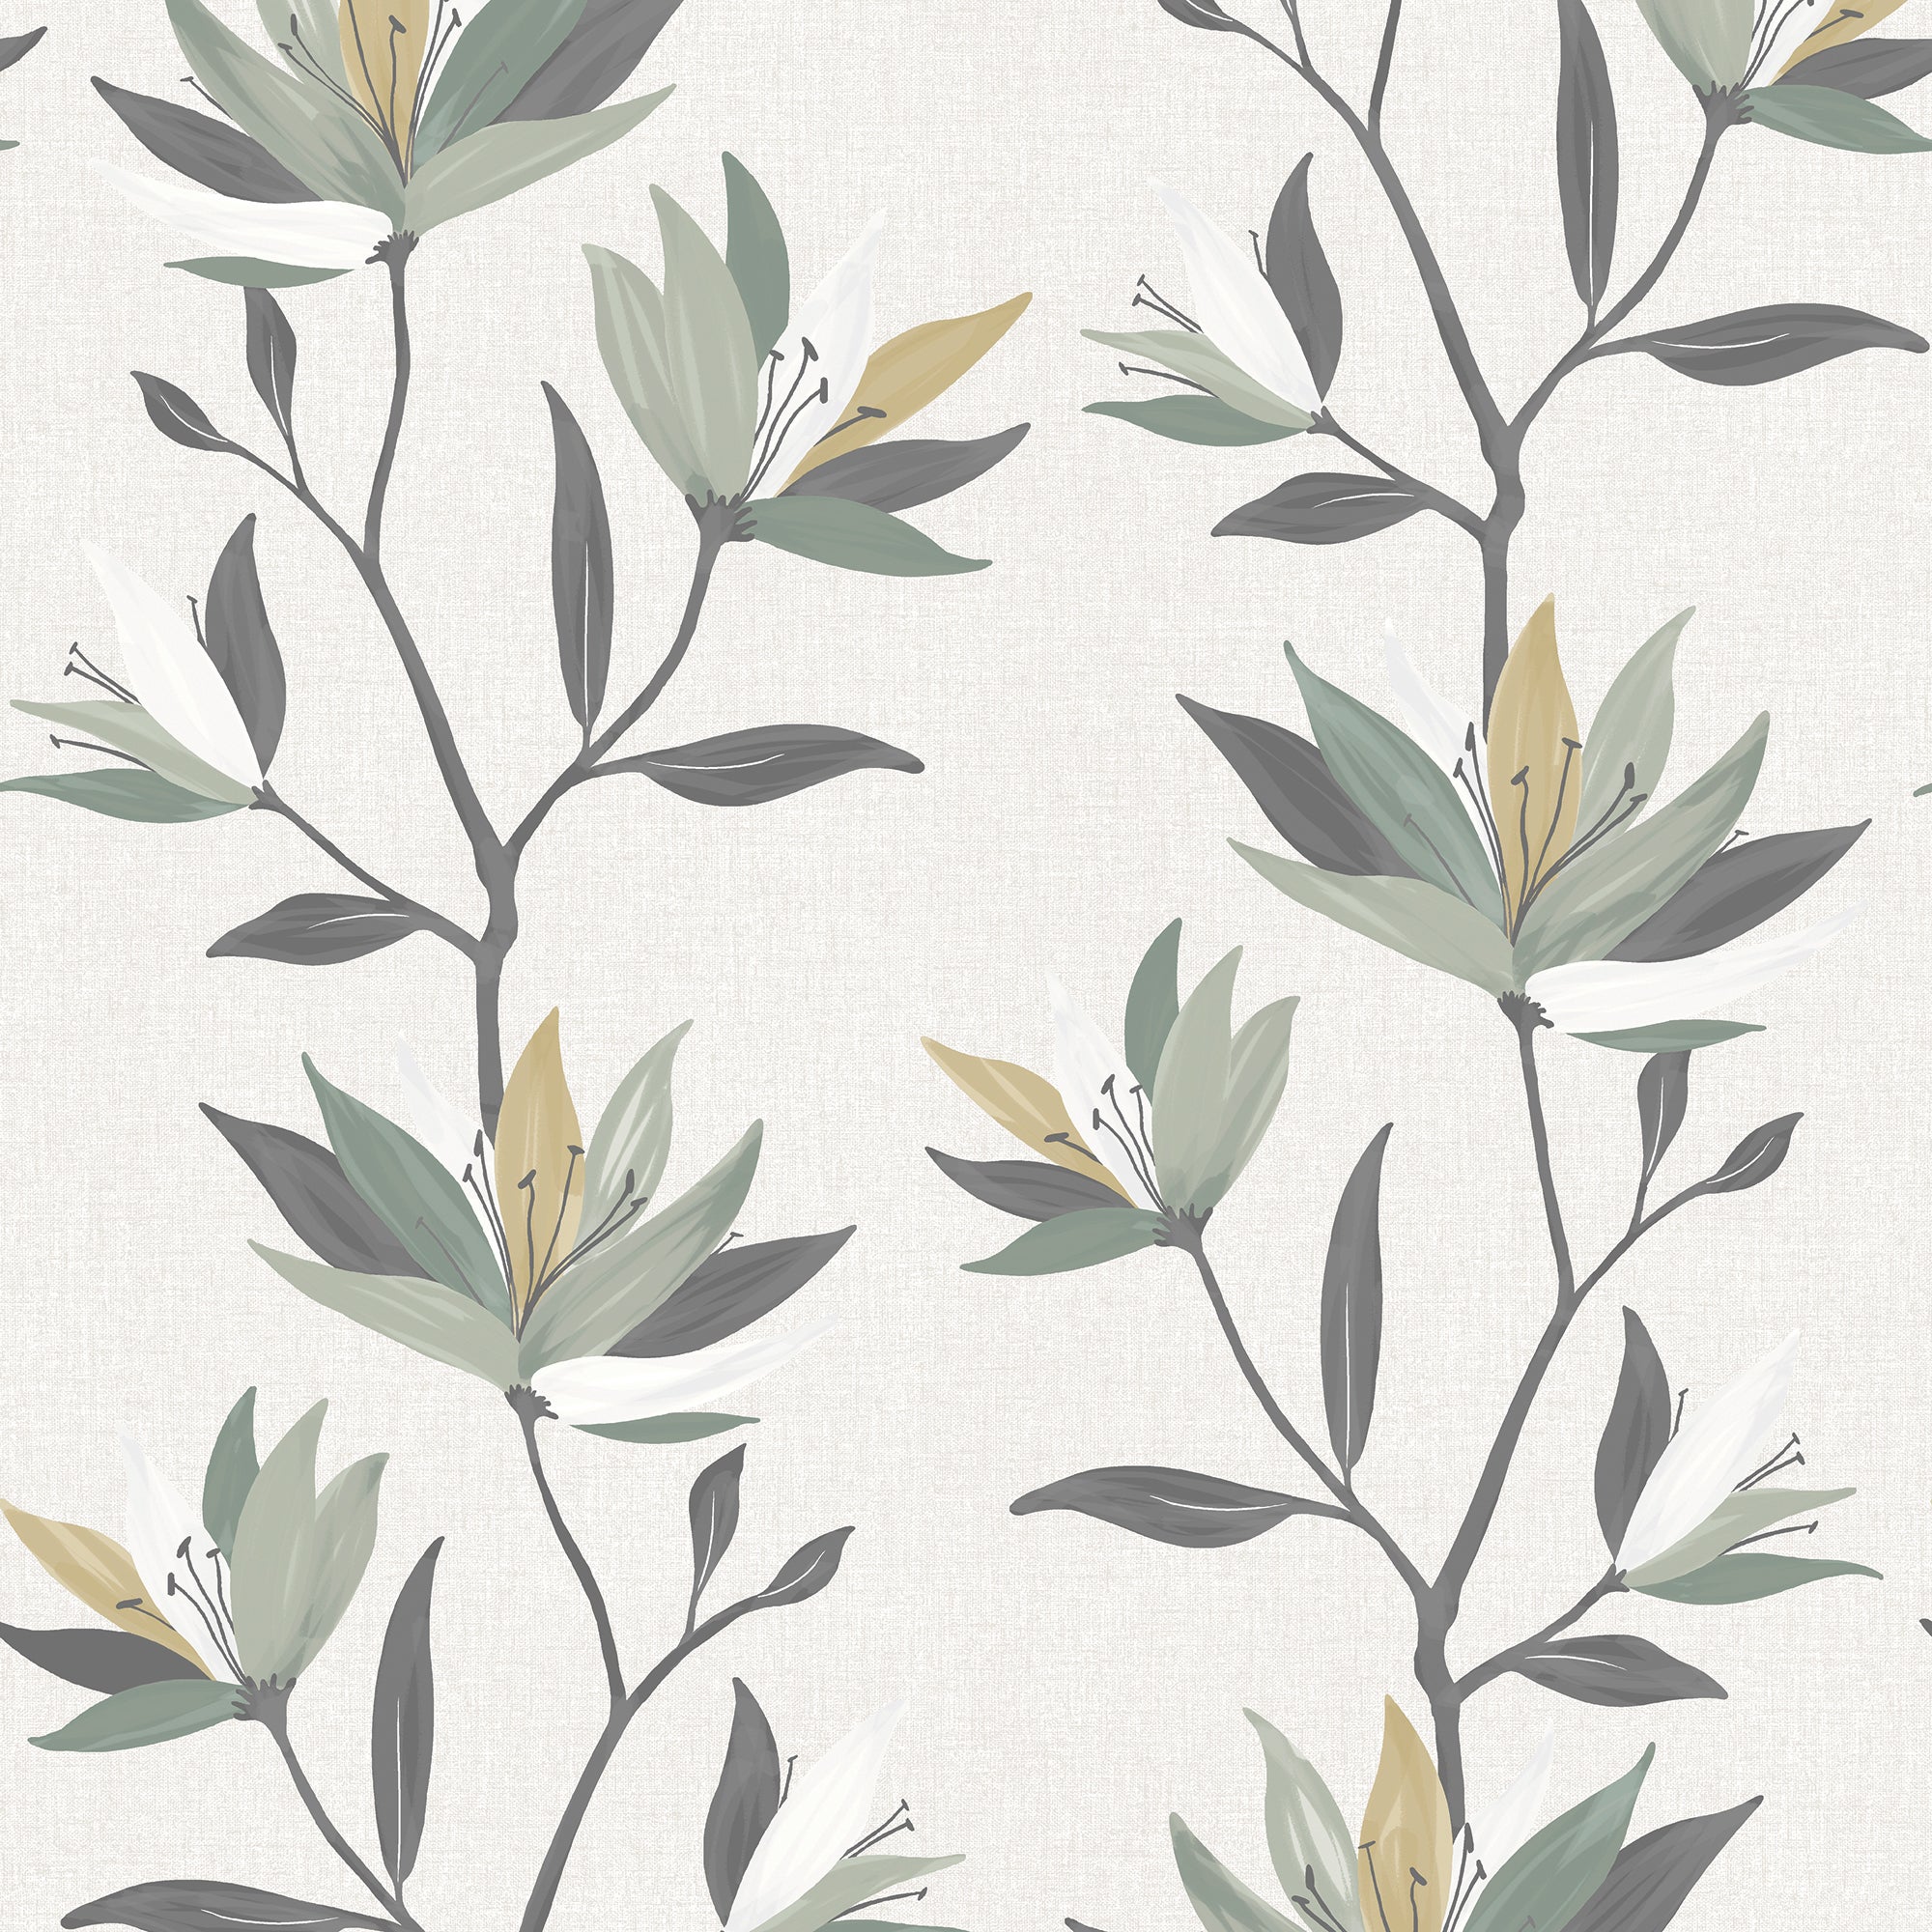 Lily Flame Retardant Daylight Made to Measure Roller Blind Fabric Sample Lily Mellow Sage